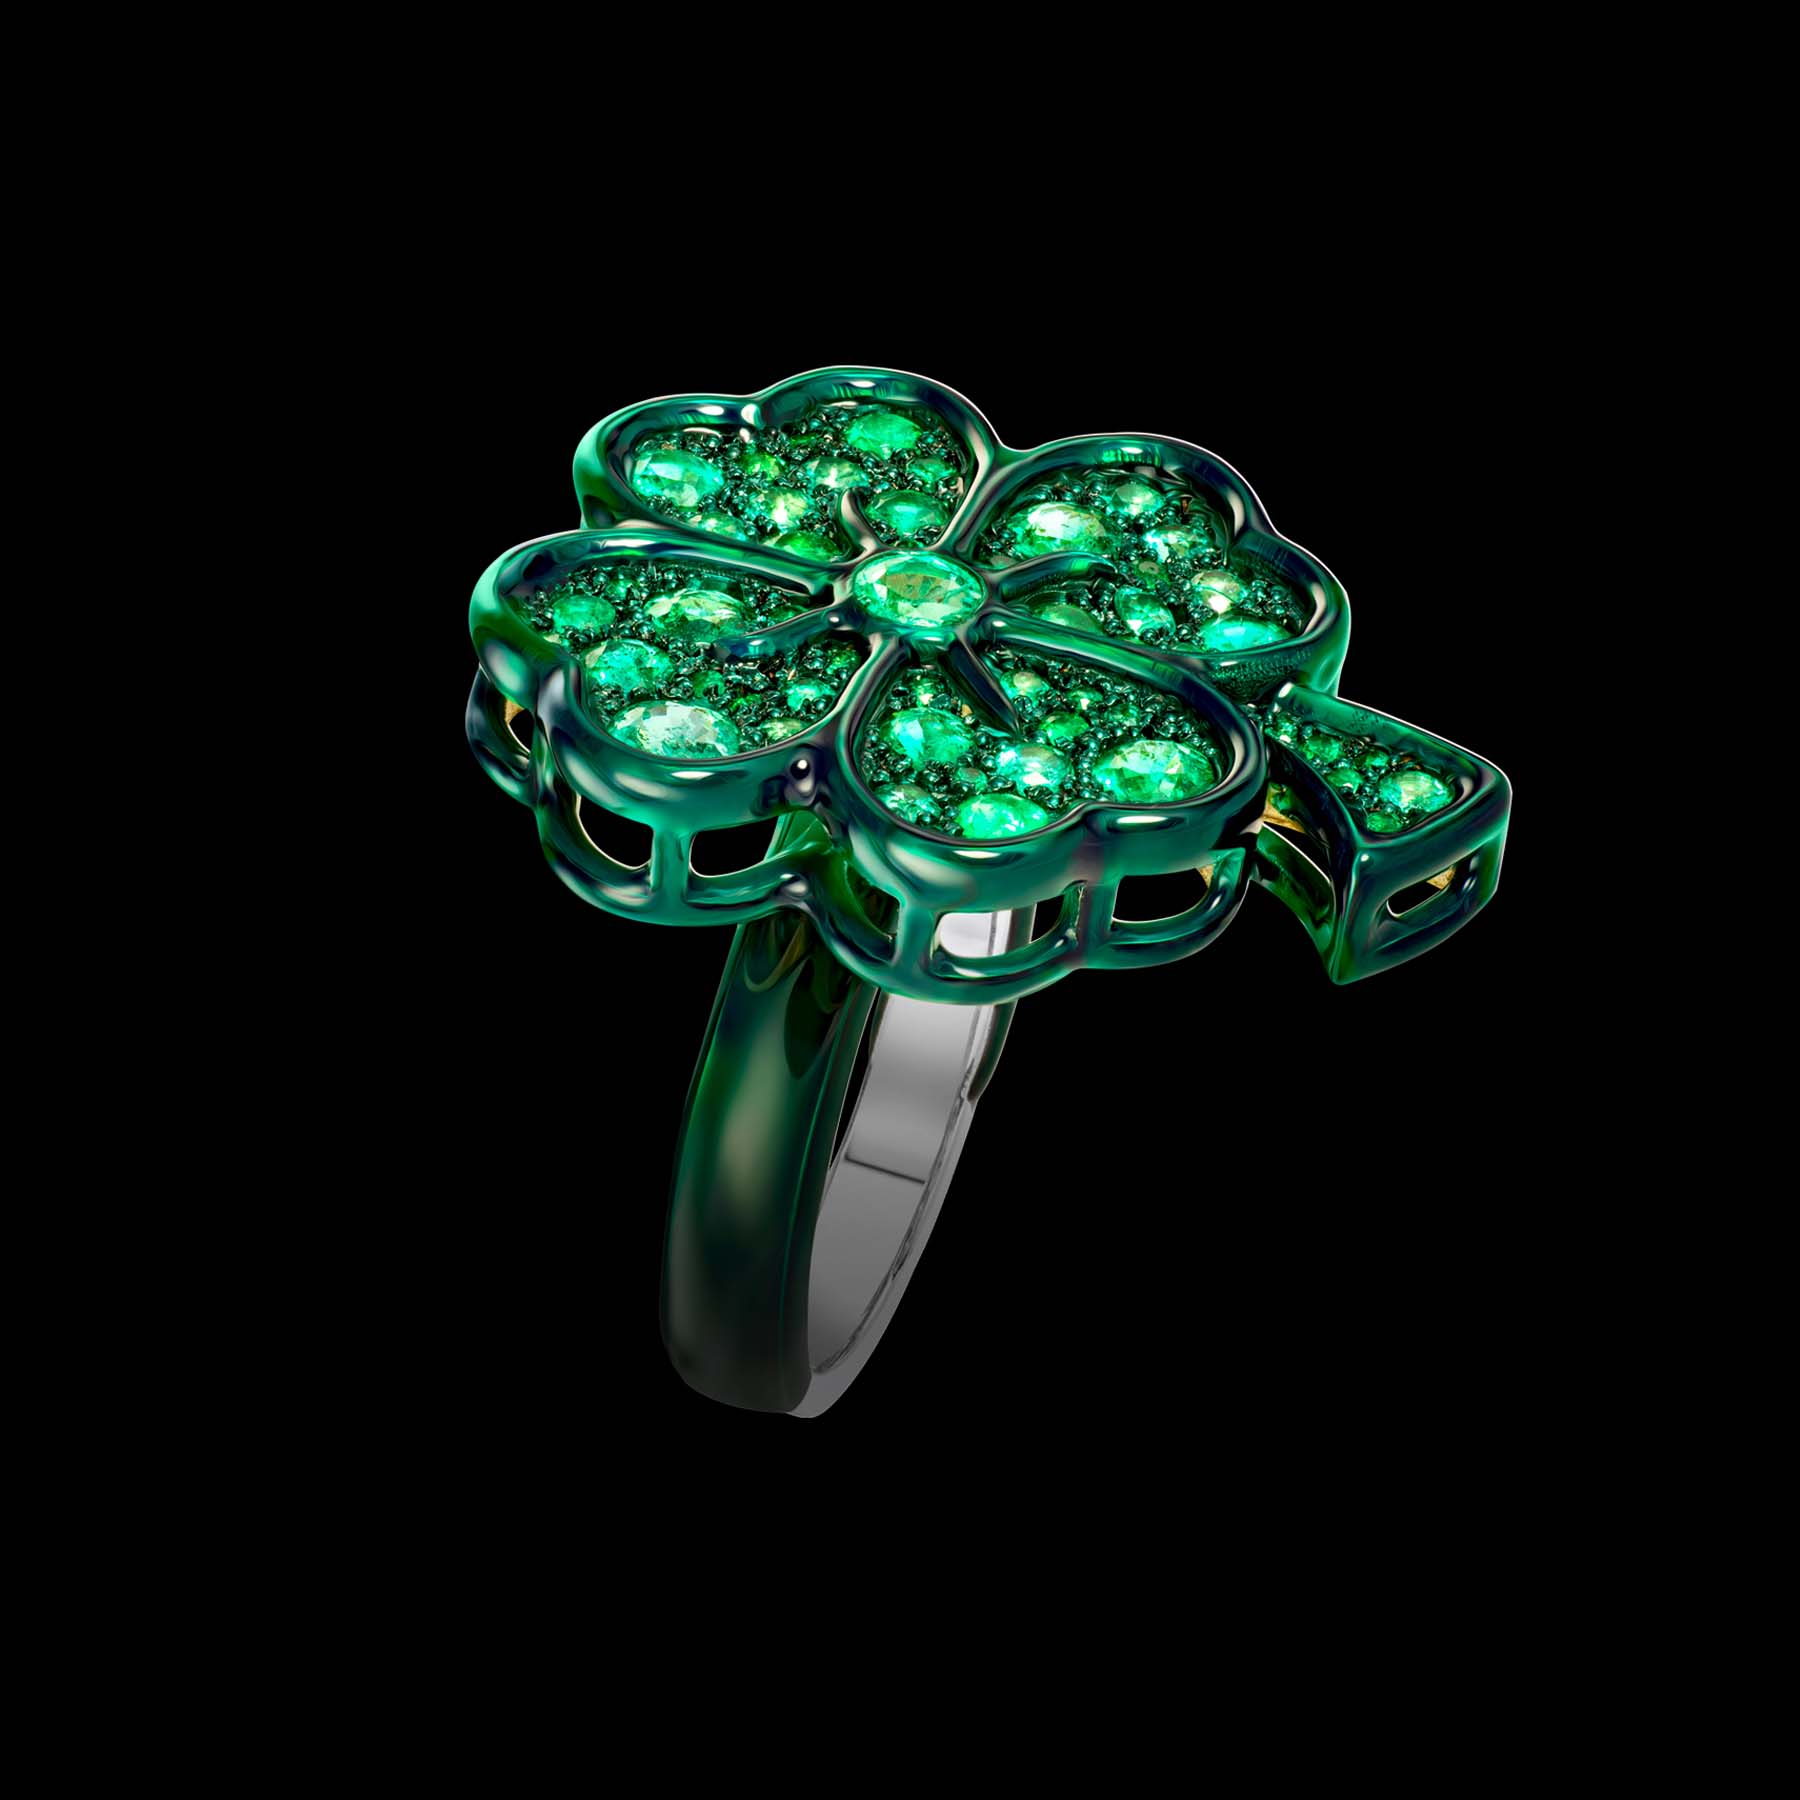 The Lucky ring by designer Solange Azagury-Partridge - Blackened 18k White Gold,, Ceramic and Enamel, Emeralds - front view 2